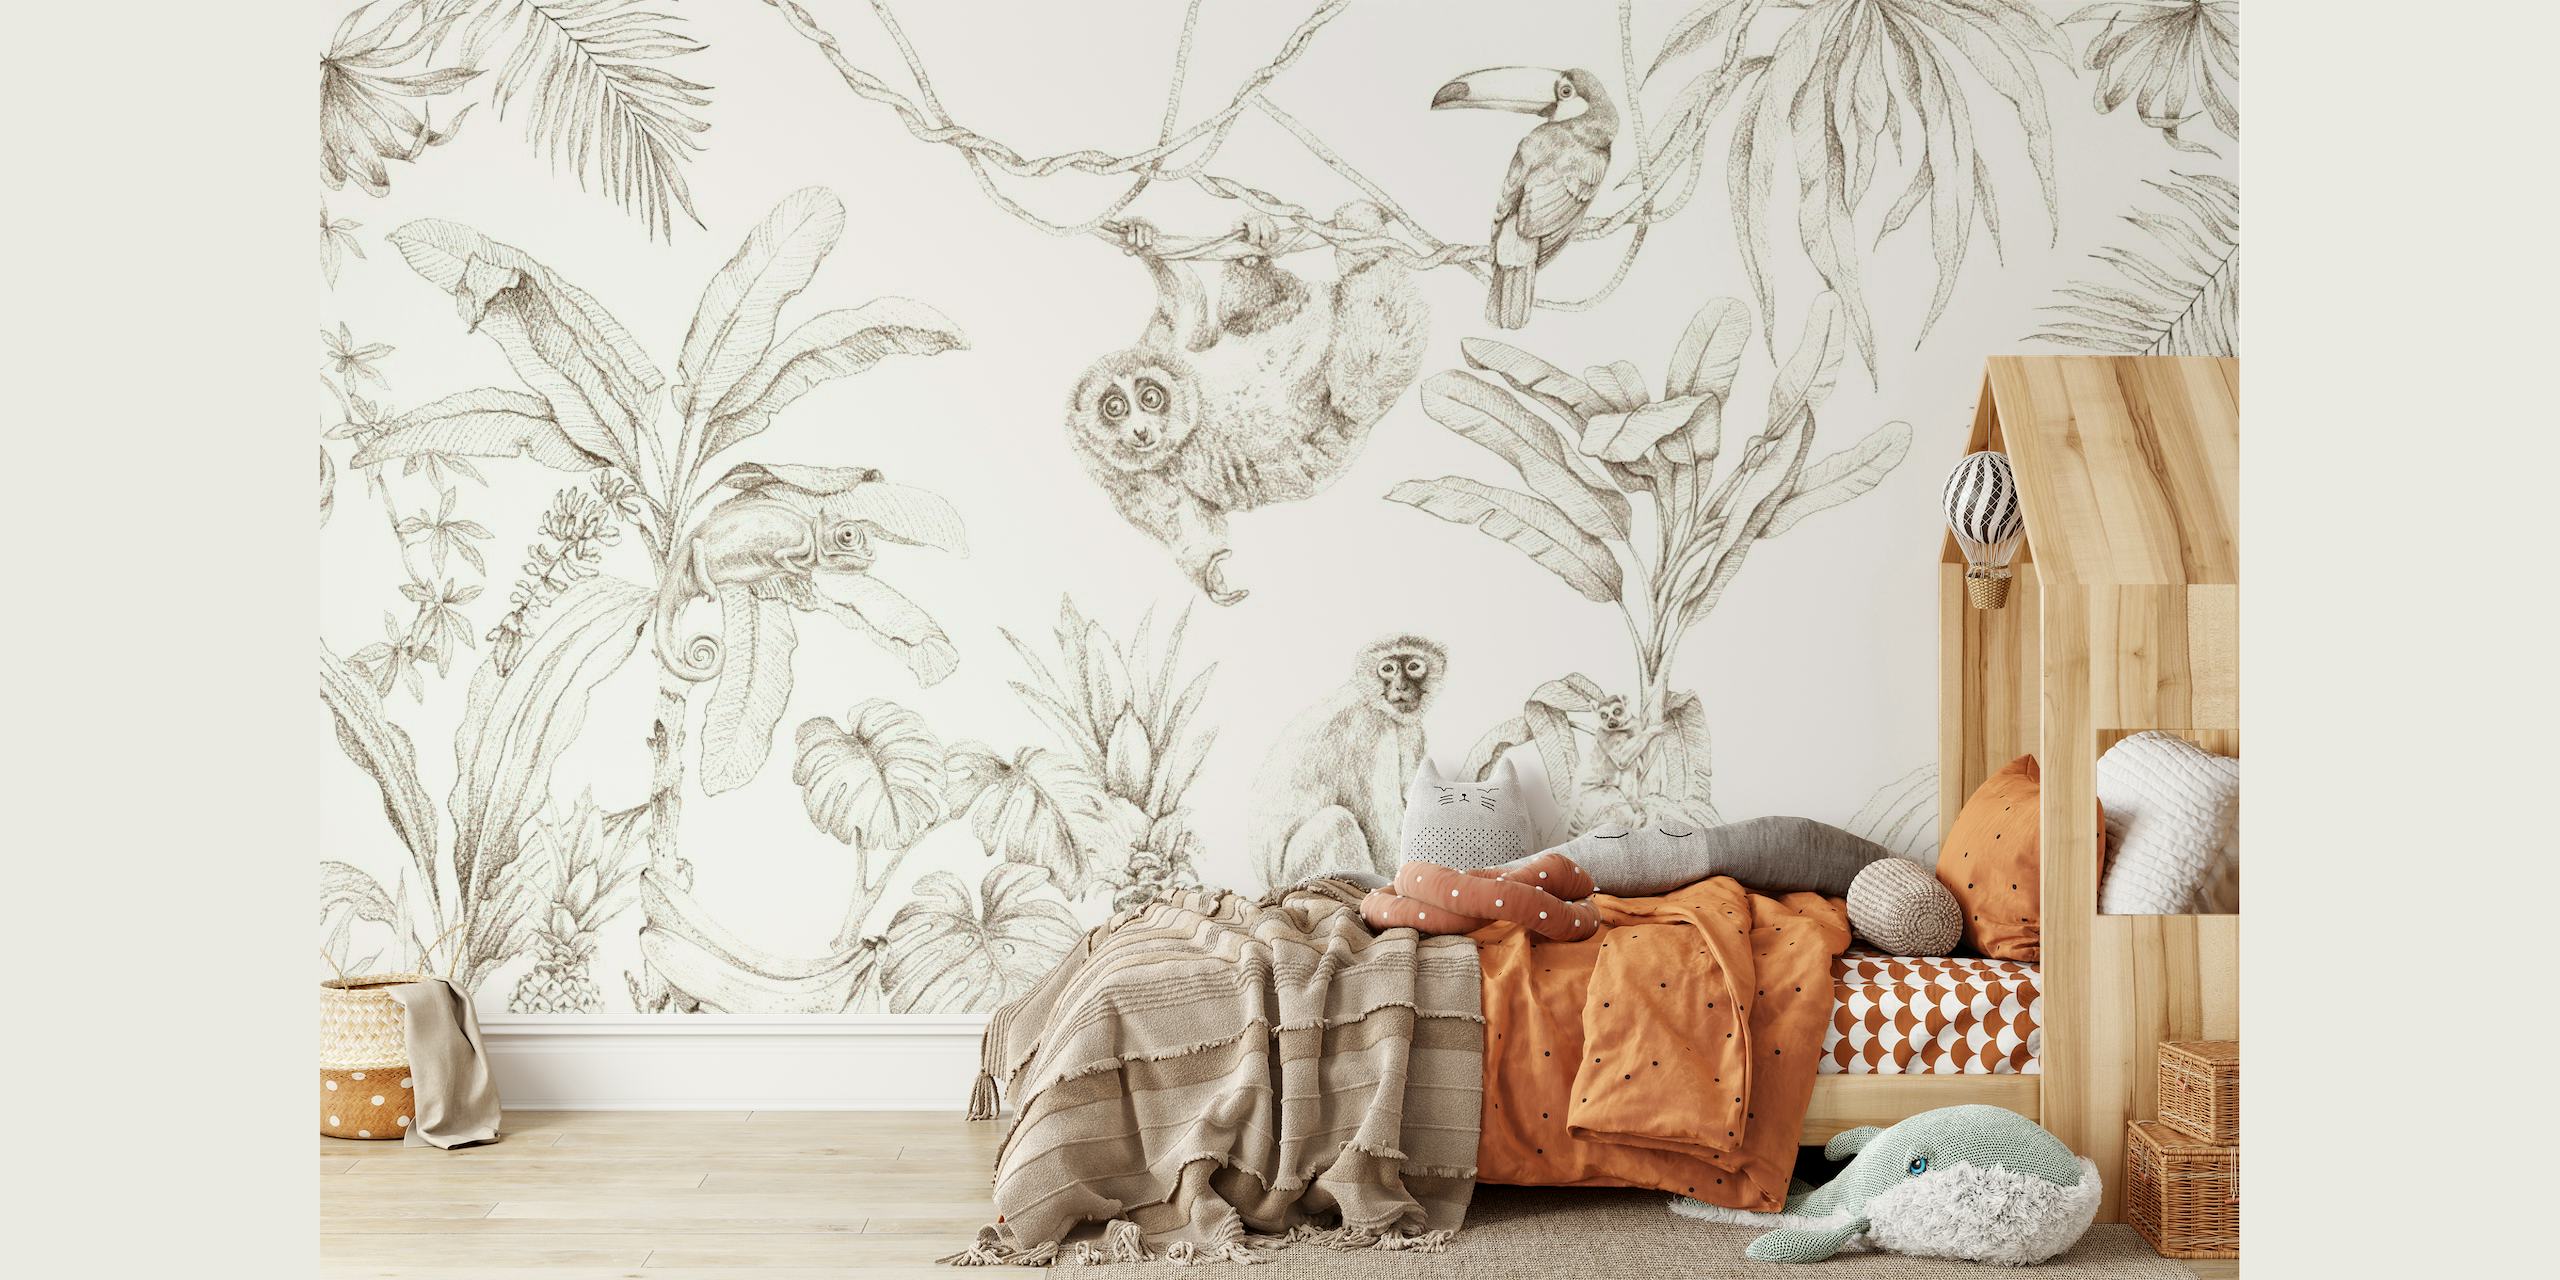 Sketch-style wall mural featuring African wildlife and tropical plants